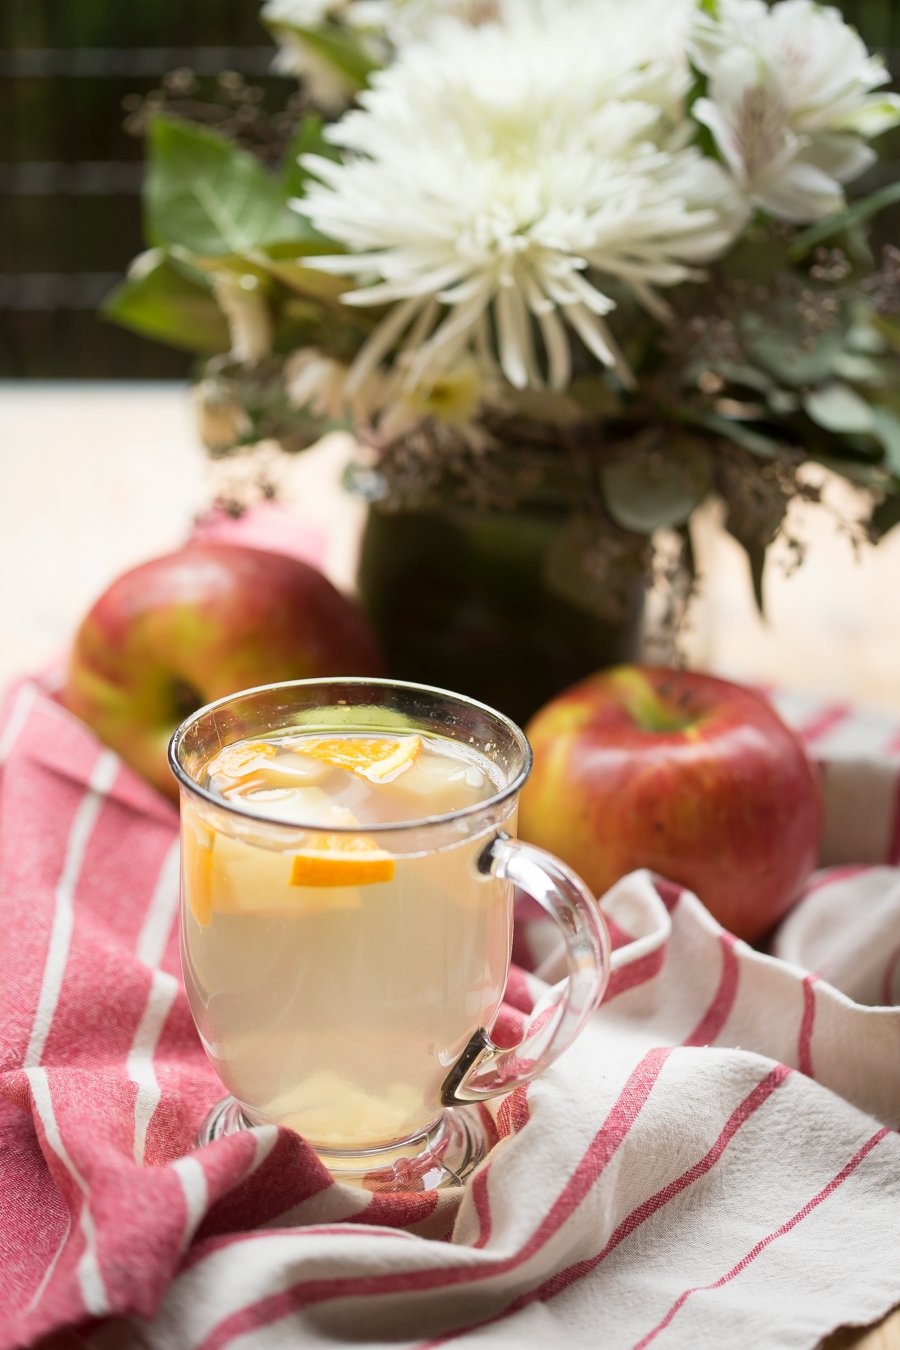 Apple drink with orange slices on a red and white towel with apples and a vase of flowers.